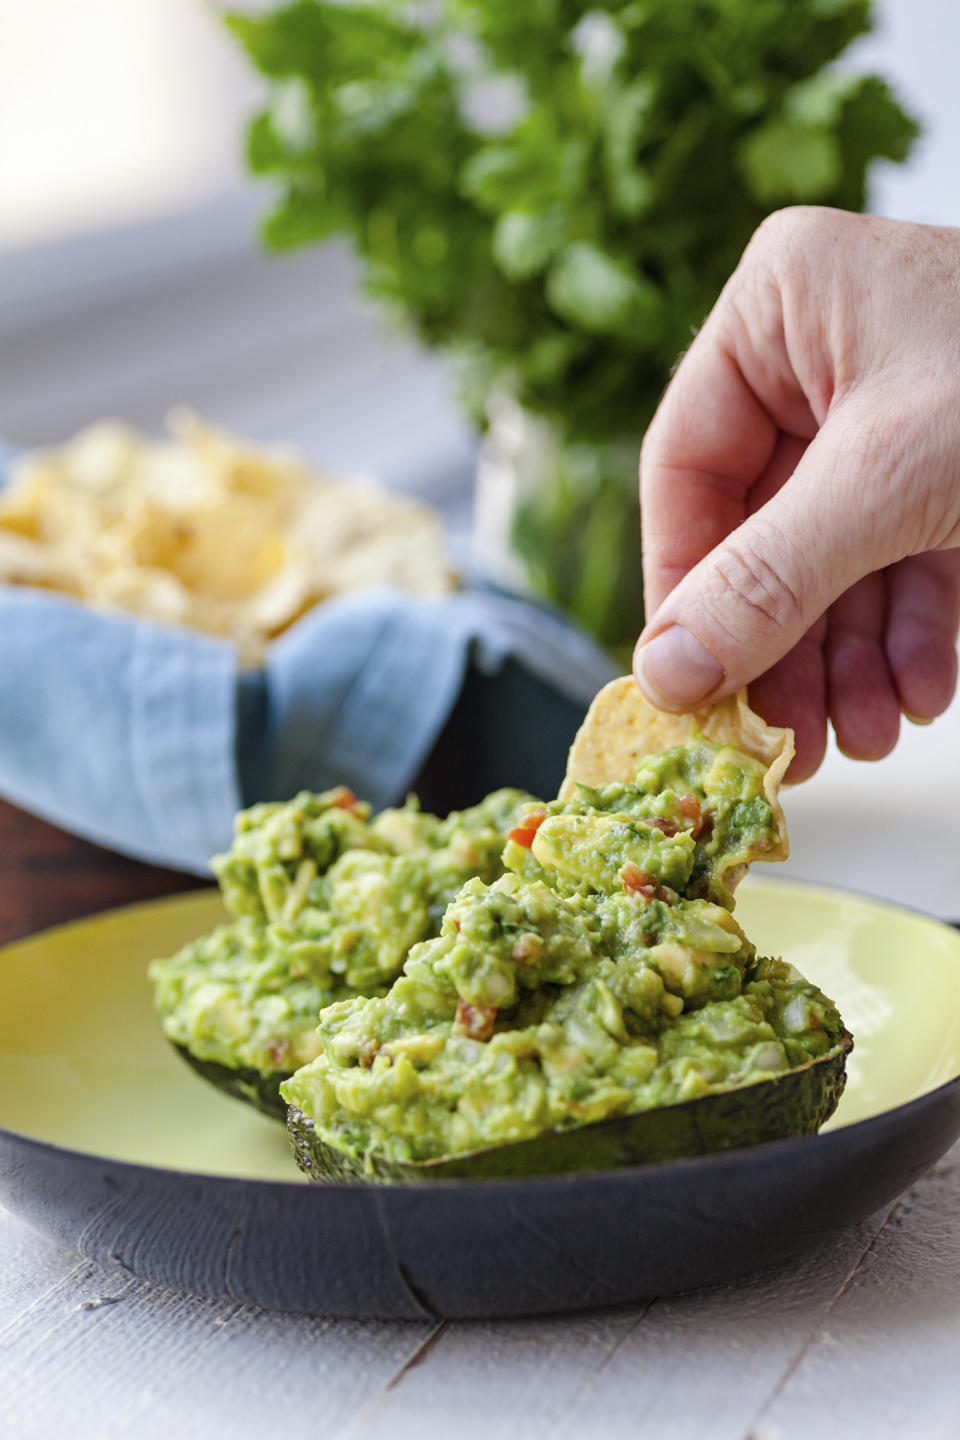 A recipe for guacamole, served in an avocado shell, appears in New York in June 2019. (Carrie Crow via AP)